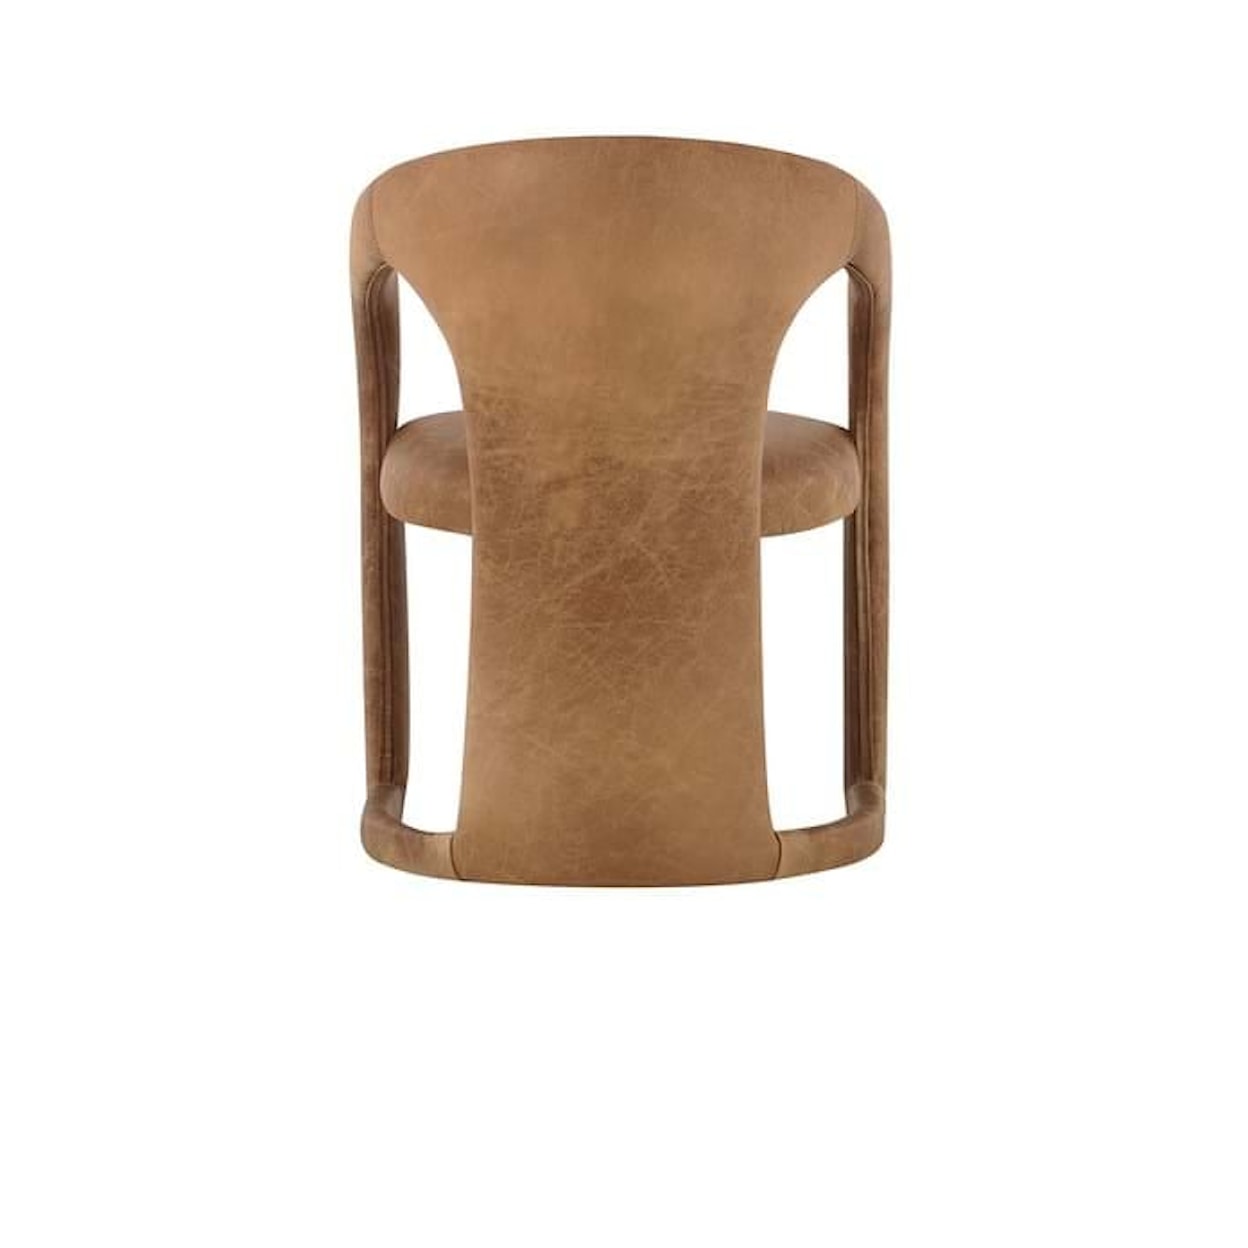 Classic Home Archie Archie Distressed Leather Dining Chair